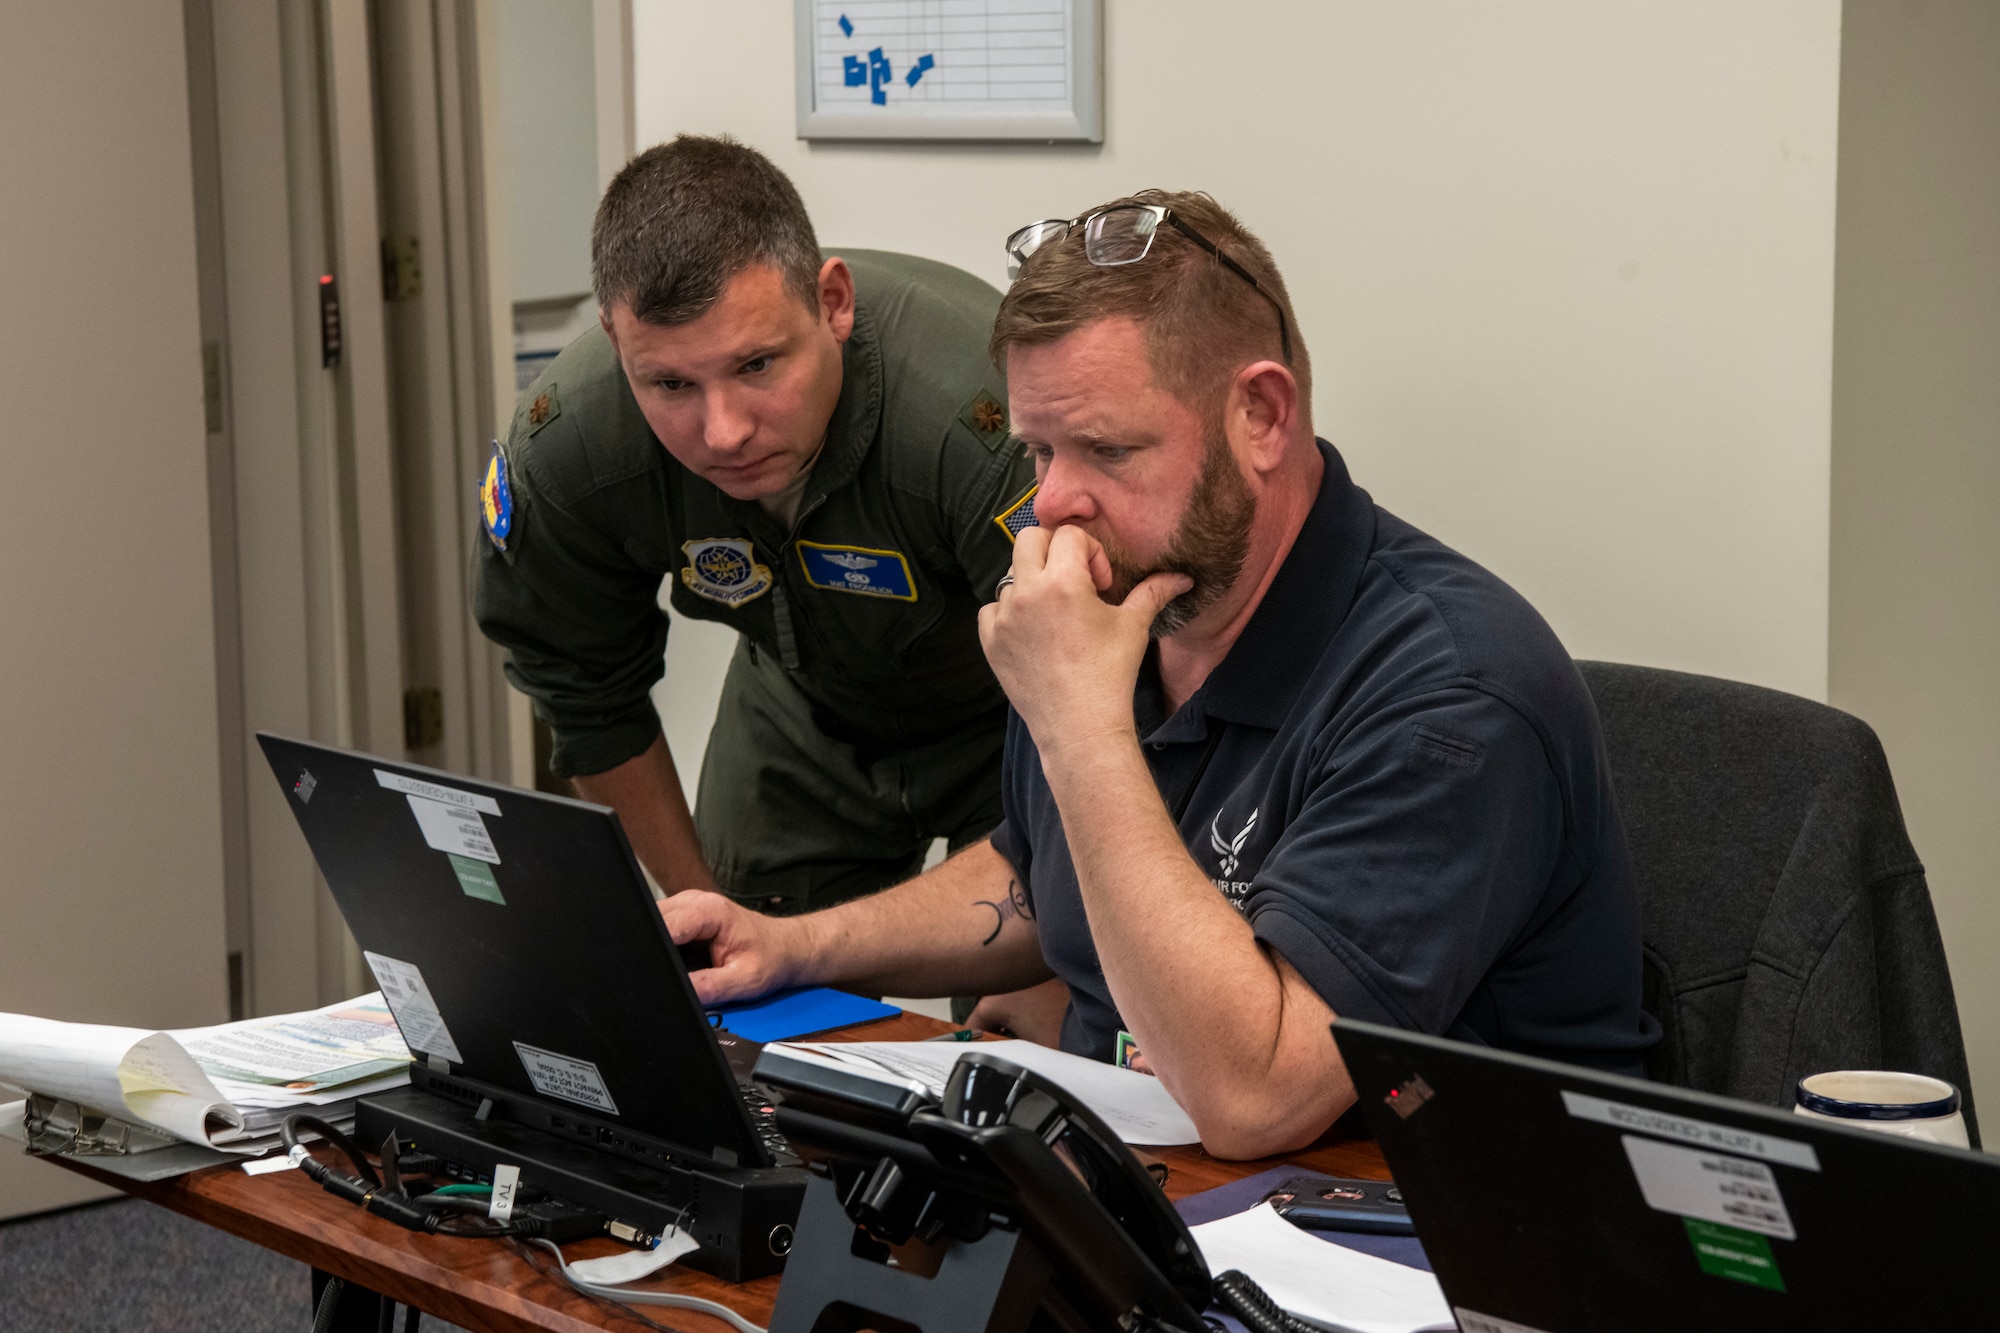 Maj. Mathew Froehlich (left), 3rd Airlift Squadron assistant director of operations, and Arnold Maas, 436th Civil Engineer Squadron emergency manager, look over documents March 16, 2020, at Dover Air Force Base, Delaware. They are both part of the Crisis Battle Staff designated to protecting the health of our communities and will continue to monitor and assess the situation. (U.S. Air Force photo by Senior Airman Christopher Quail)